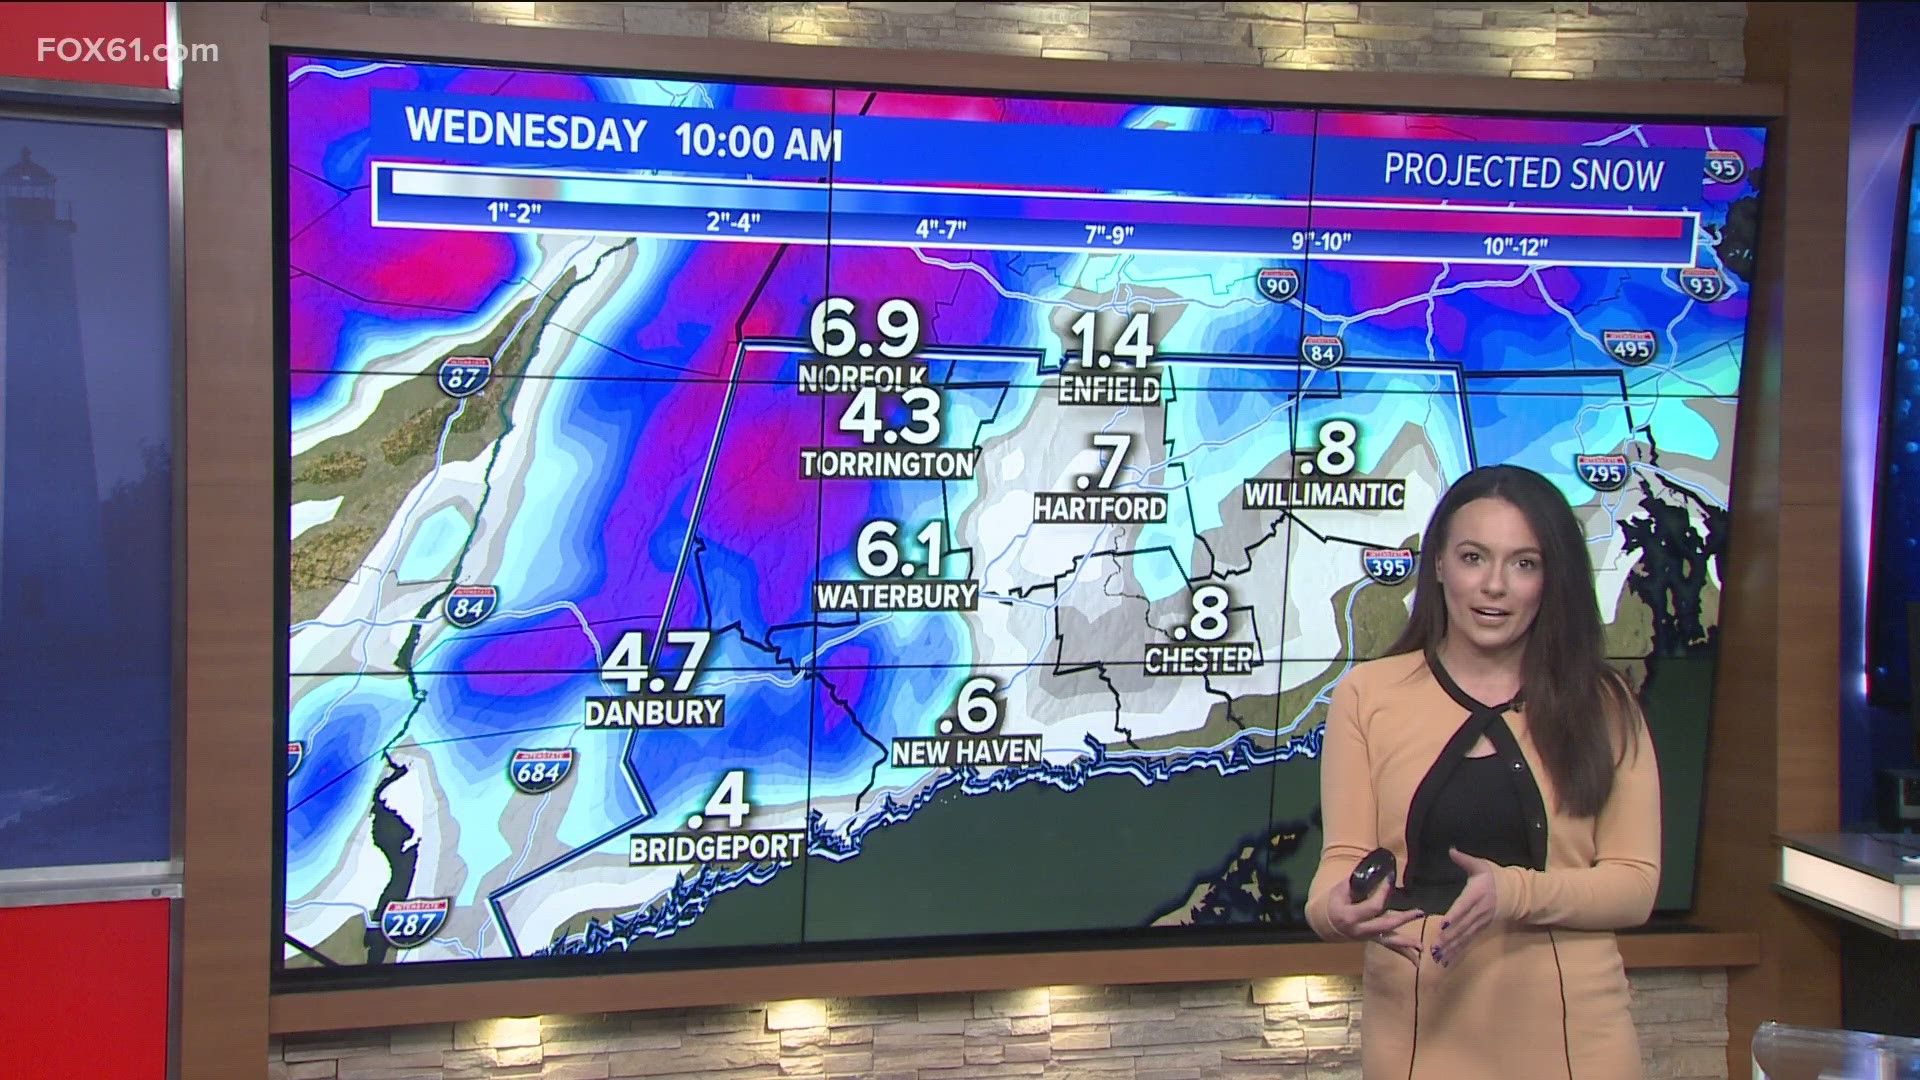 Meteorologist Rachel Piscitelli has a look at the projected snow totals for the nor'easter in CT.